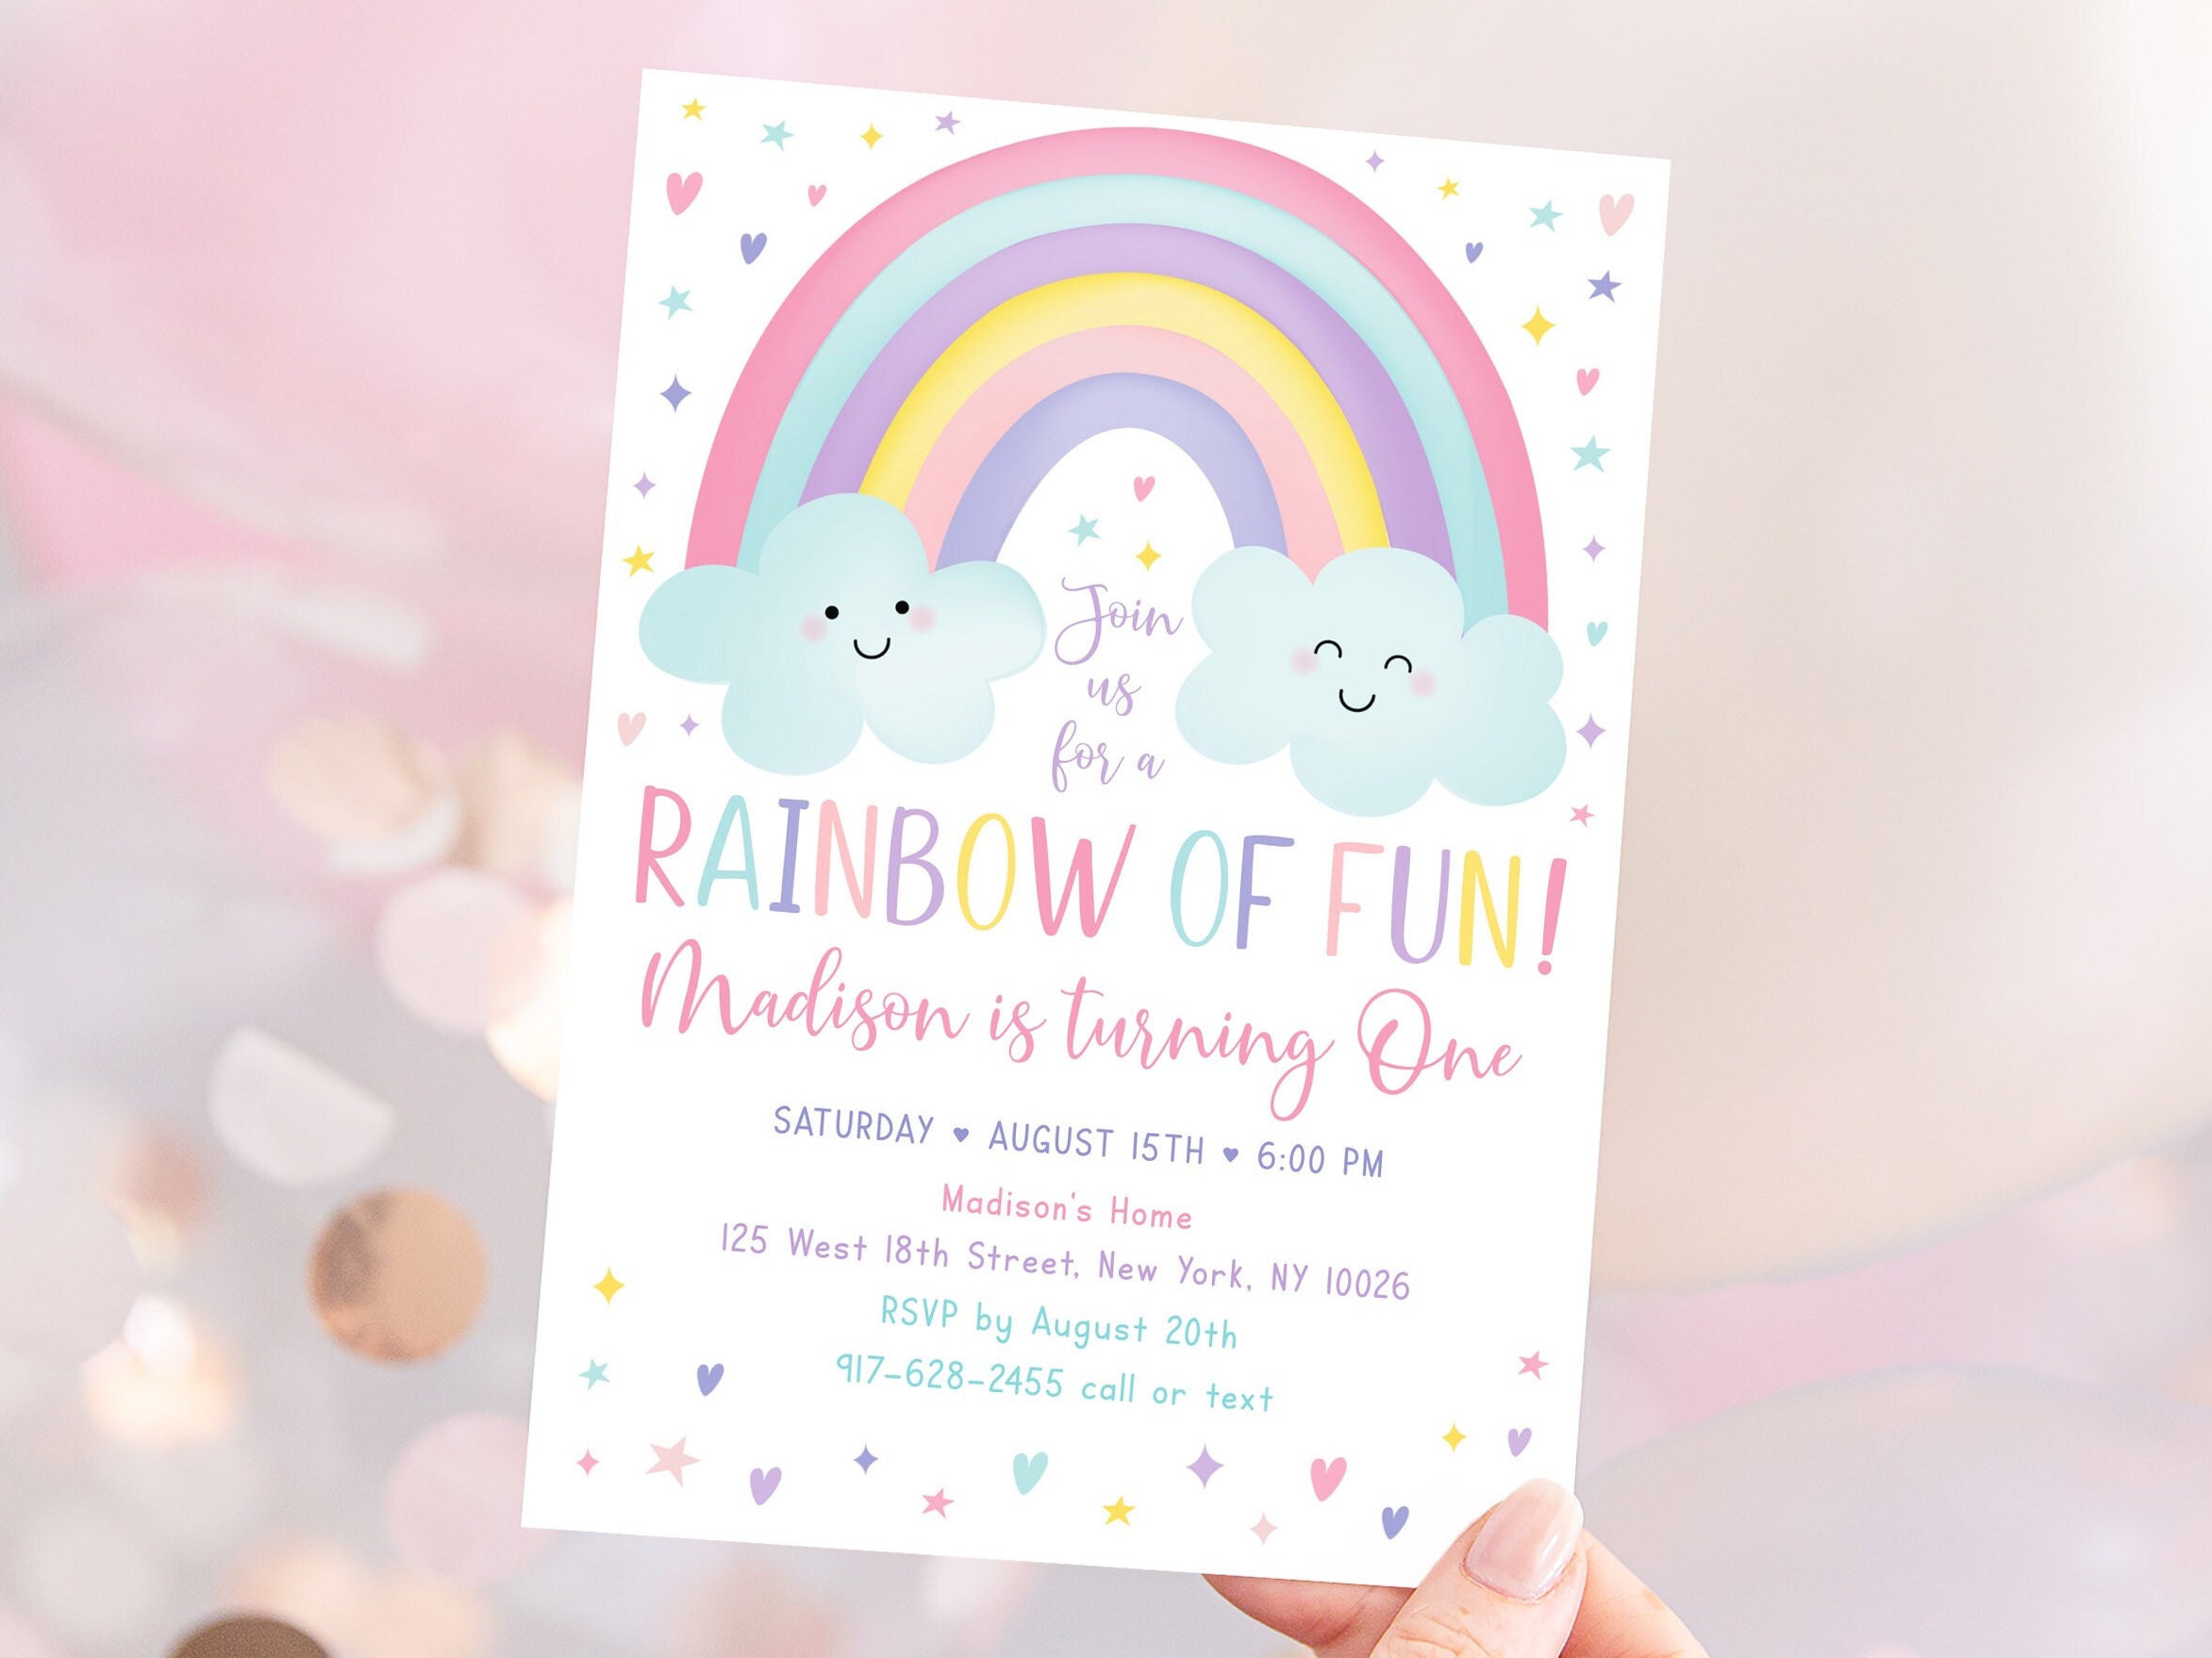 Free Printable Pastel Rainbow Party Decorations - Home Crafts and More